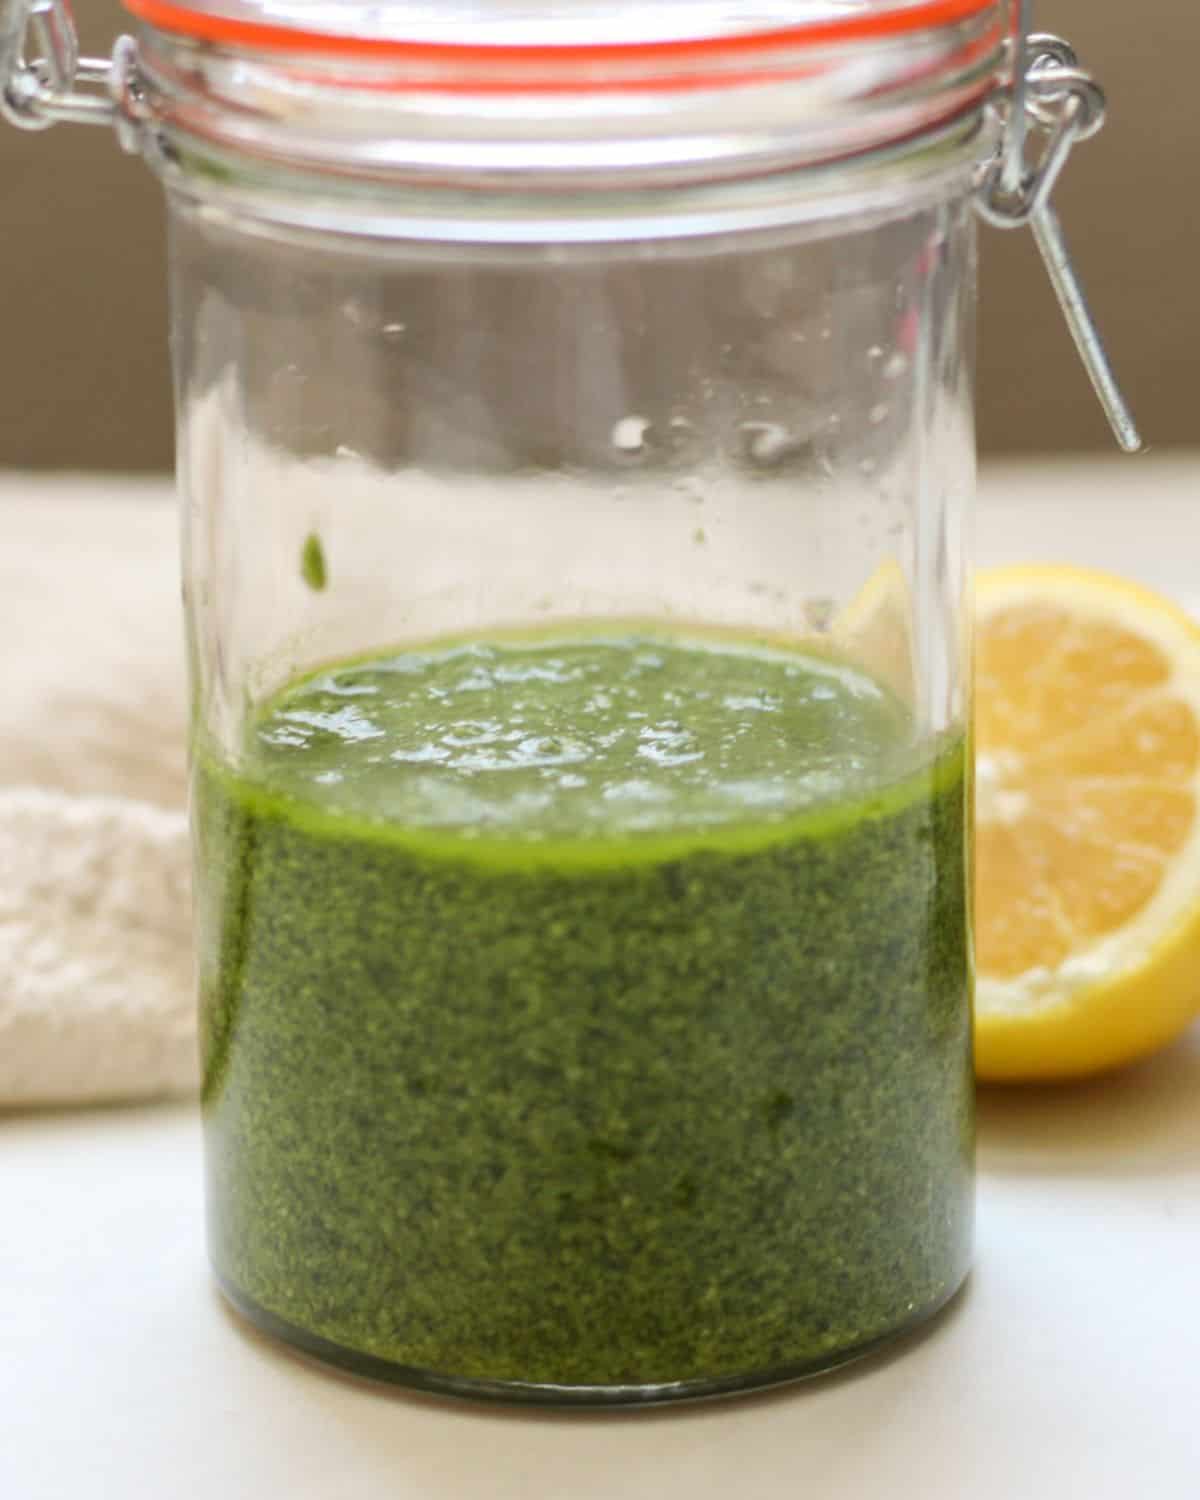 Green sauce in a tall glass jar with the lid.